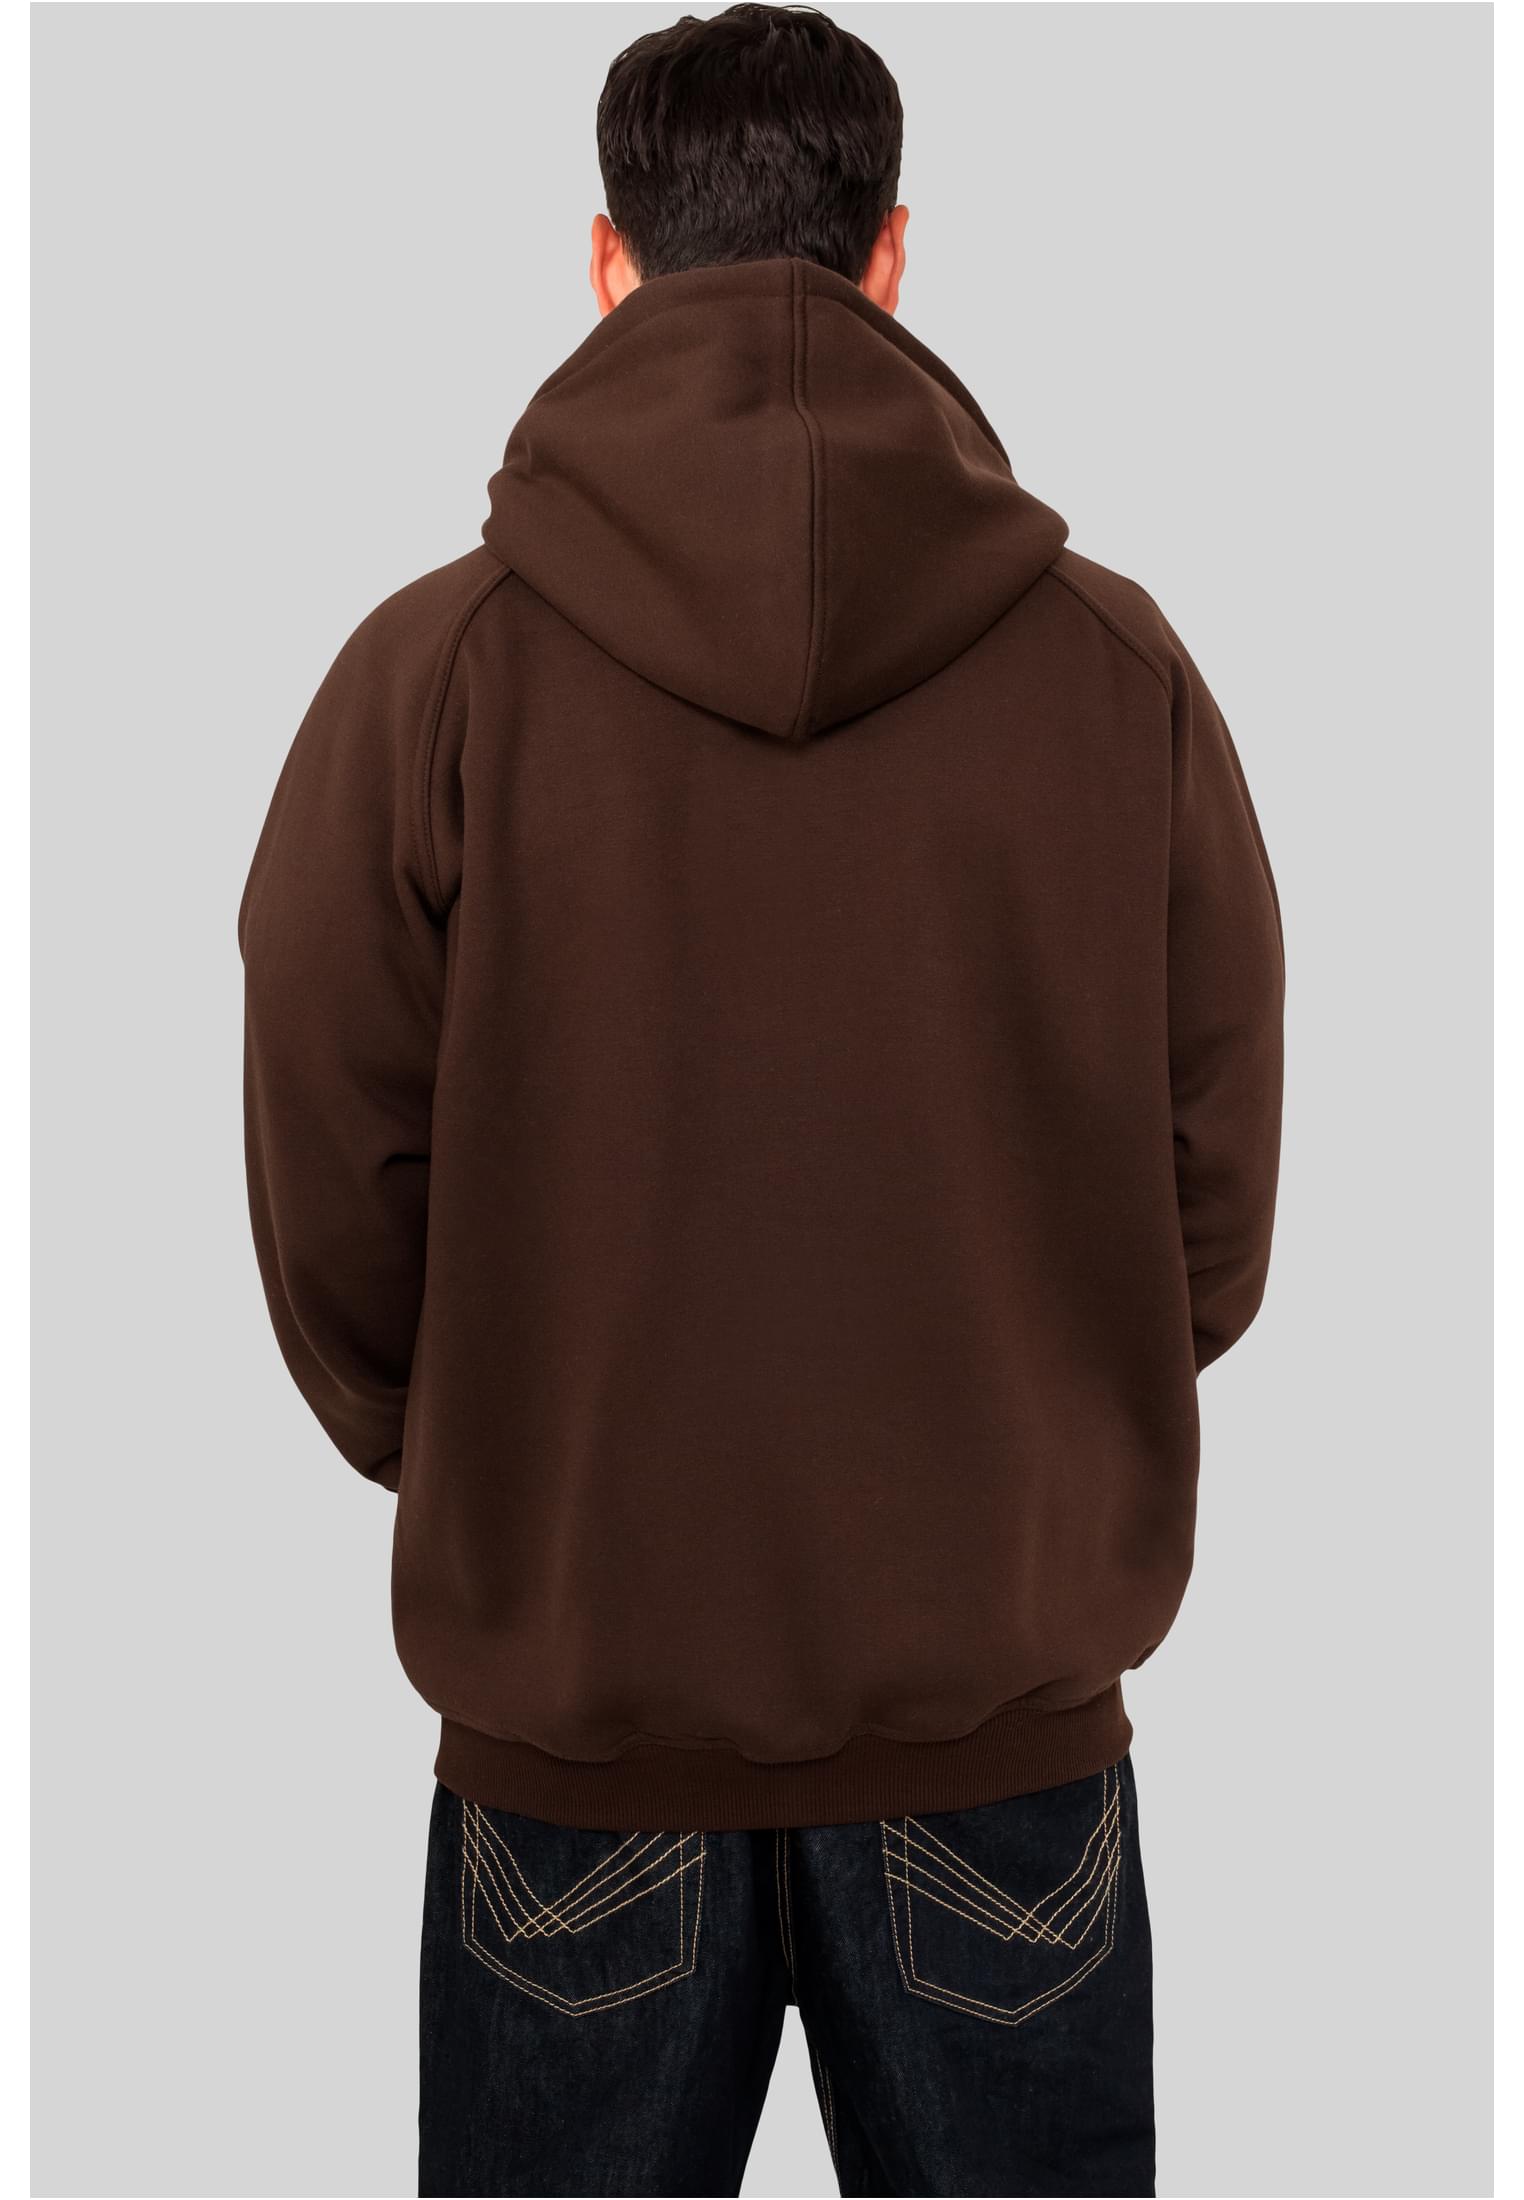 Plus Size Blank Hoody in Farbe brown